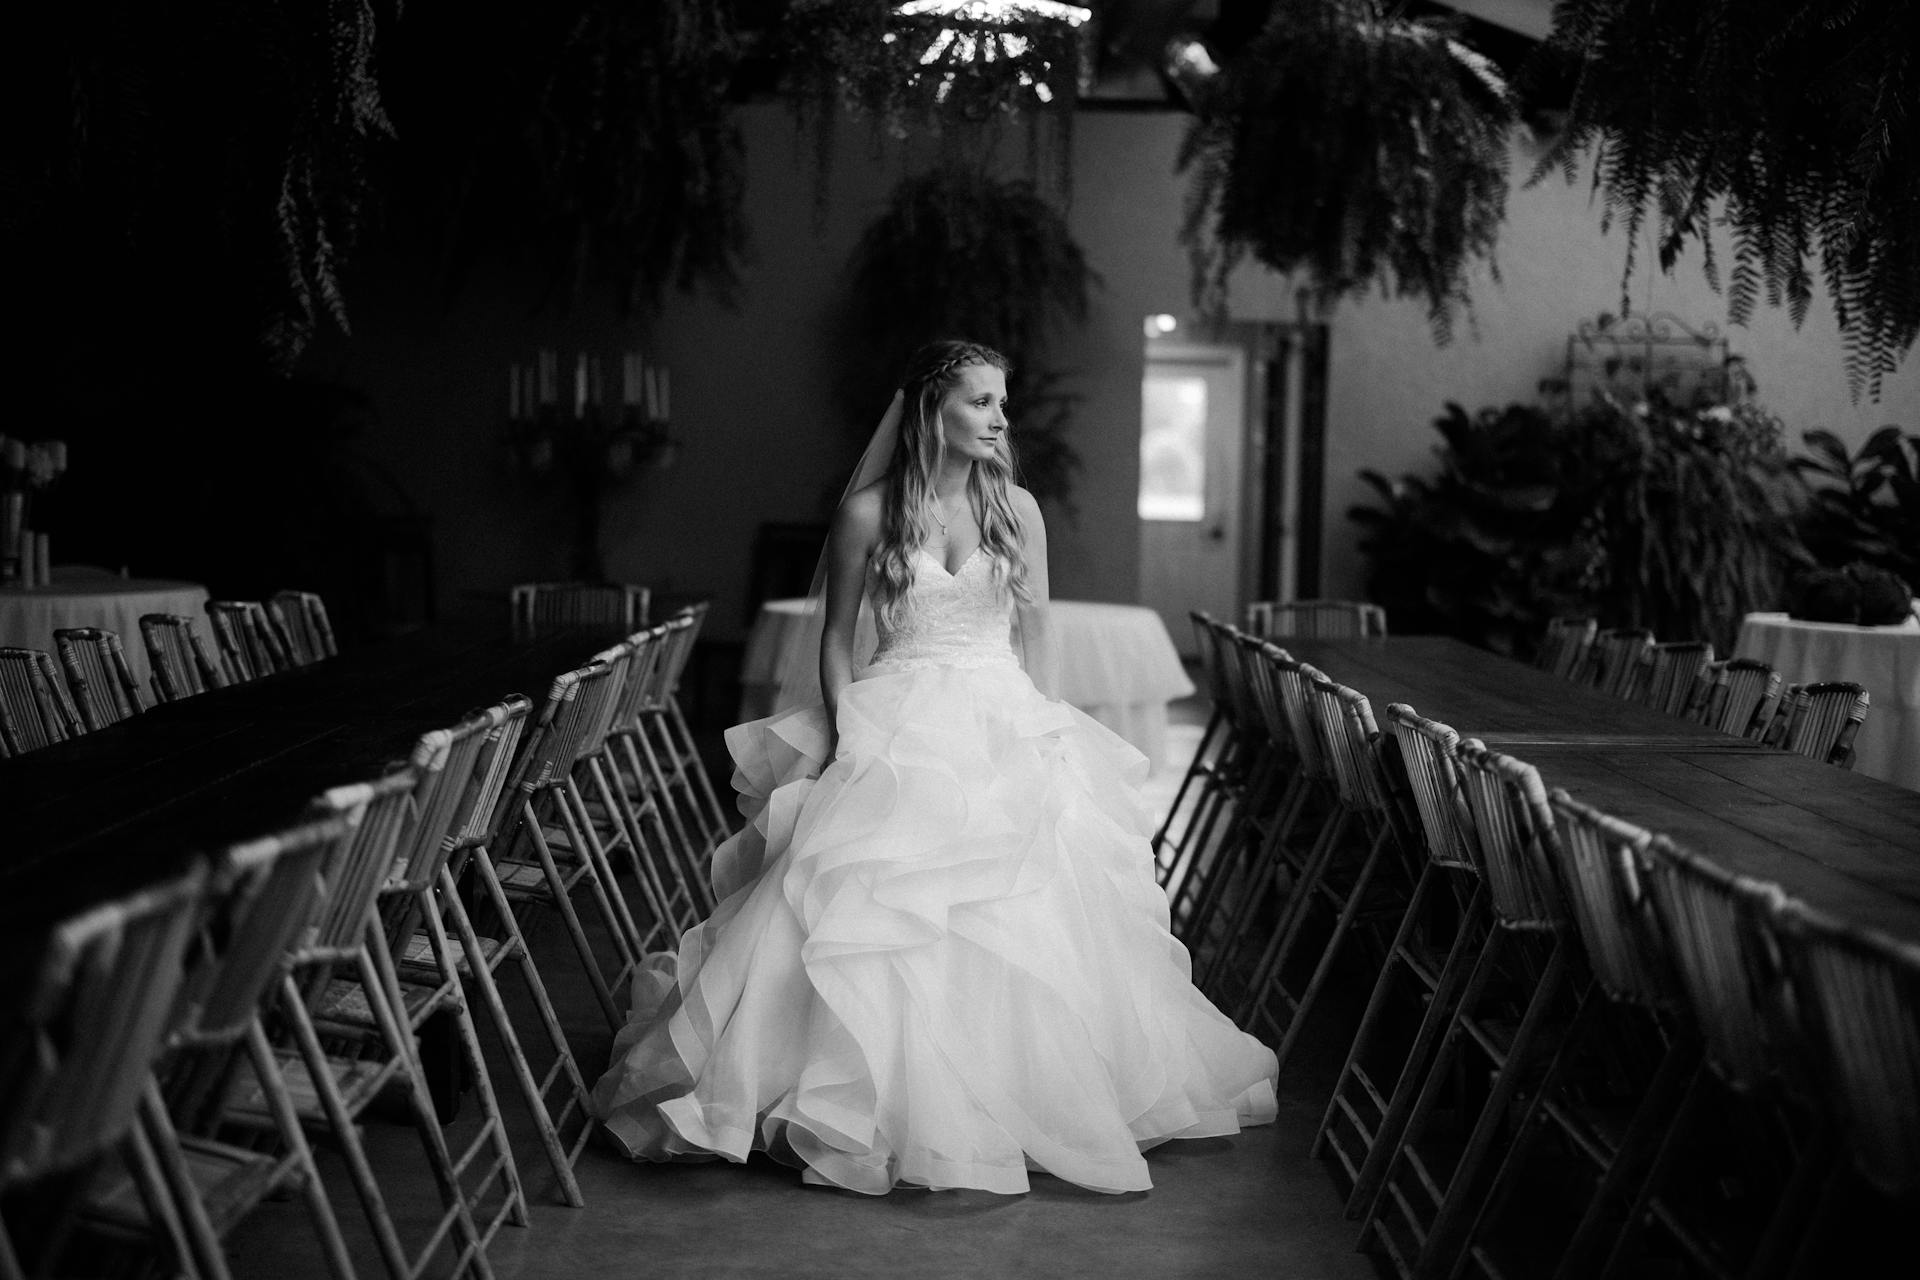 A grayscale photo of a bride standing walking down a row of empty chairs | Source: Pexels